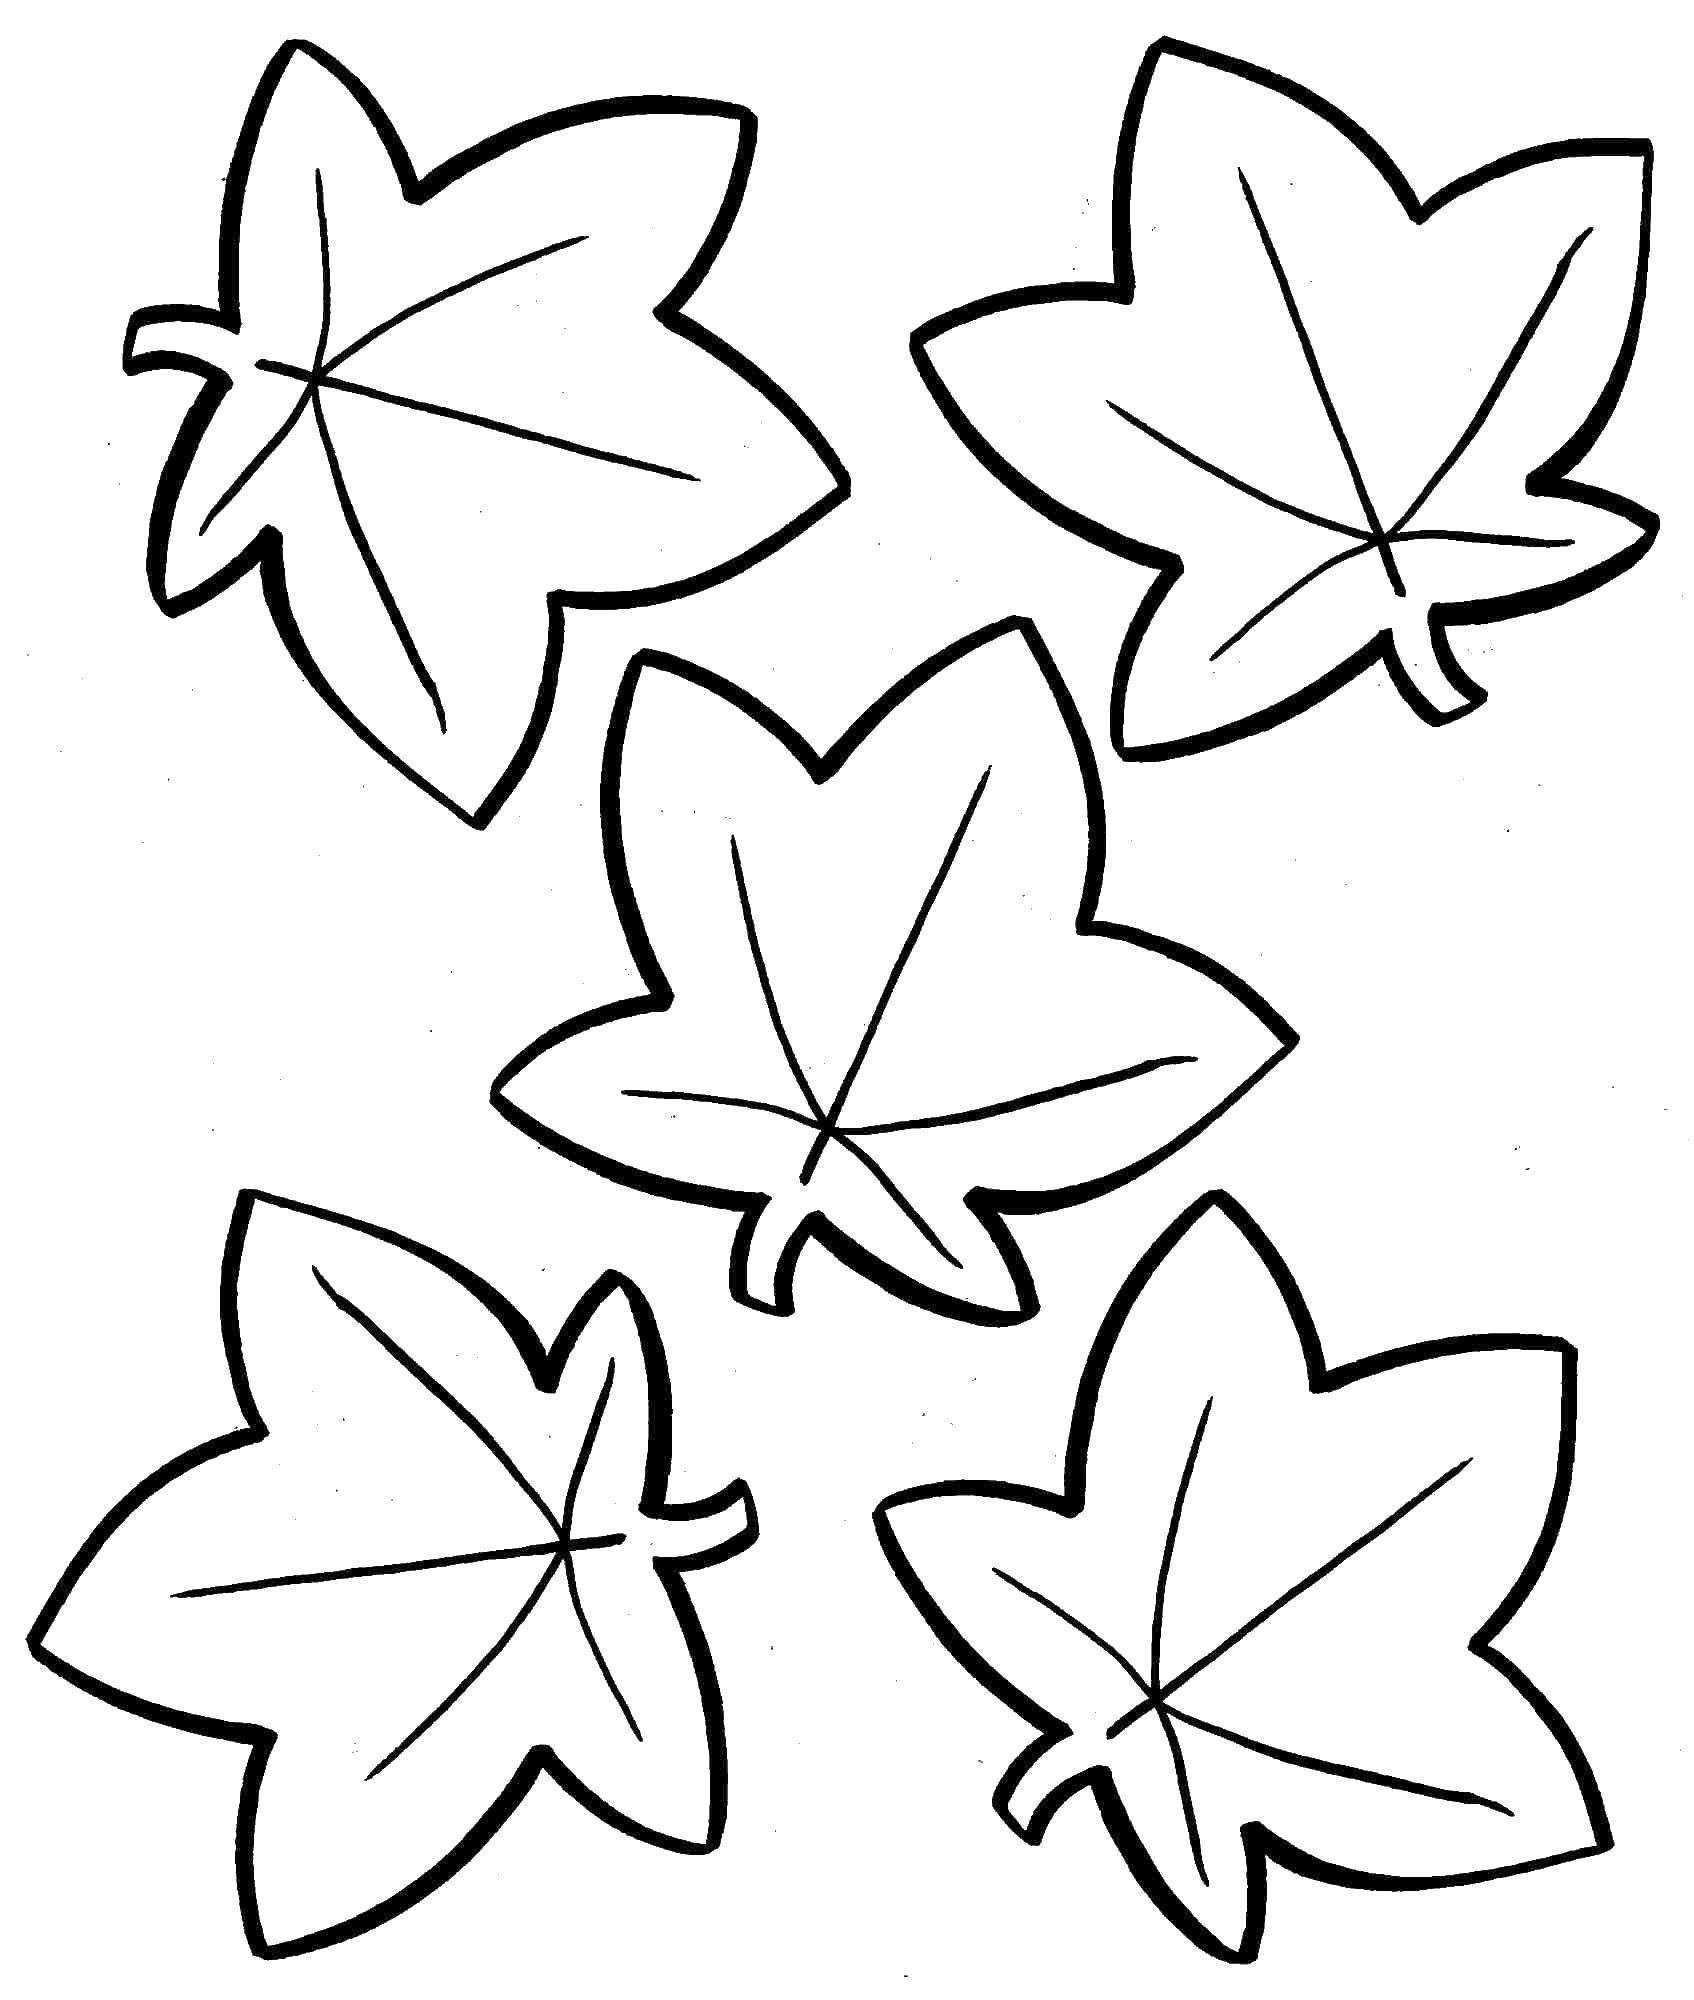 Coloring Leaves. Category leaves. Tags:  leaves, sheet.